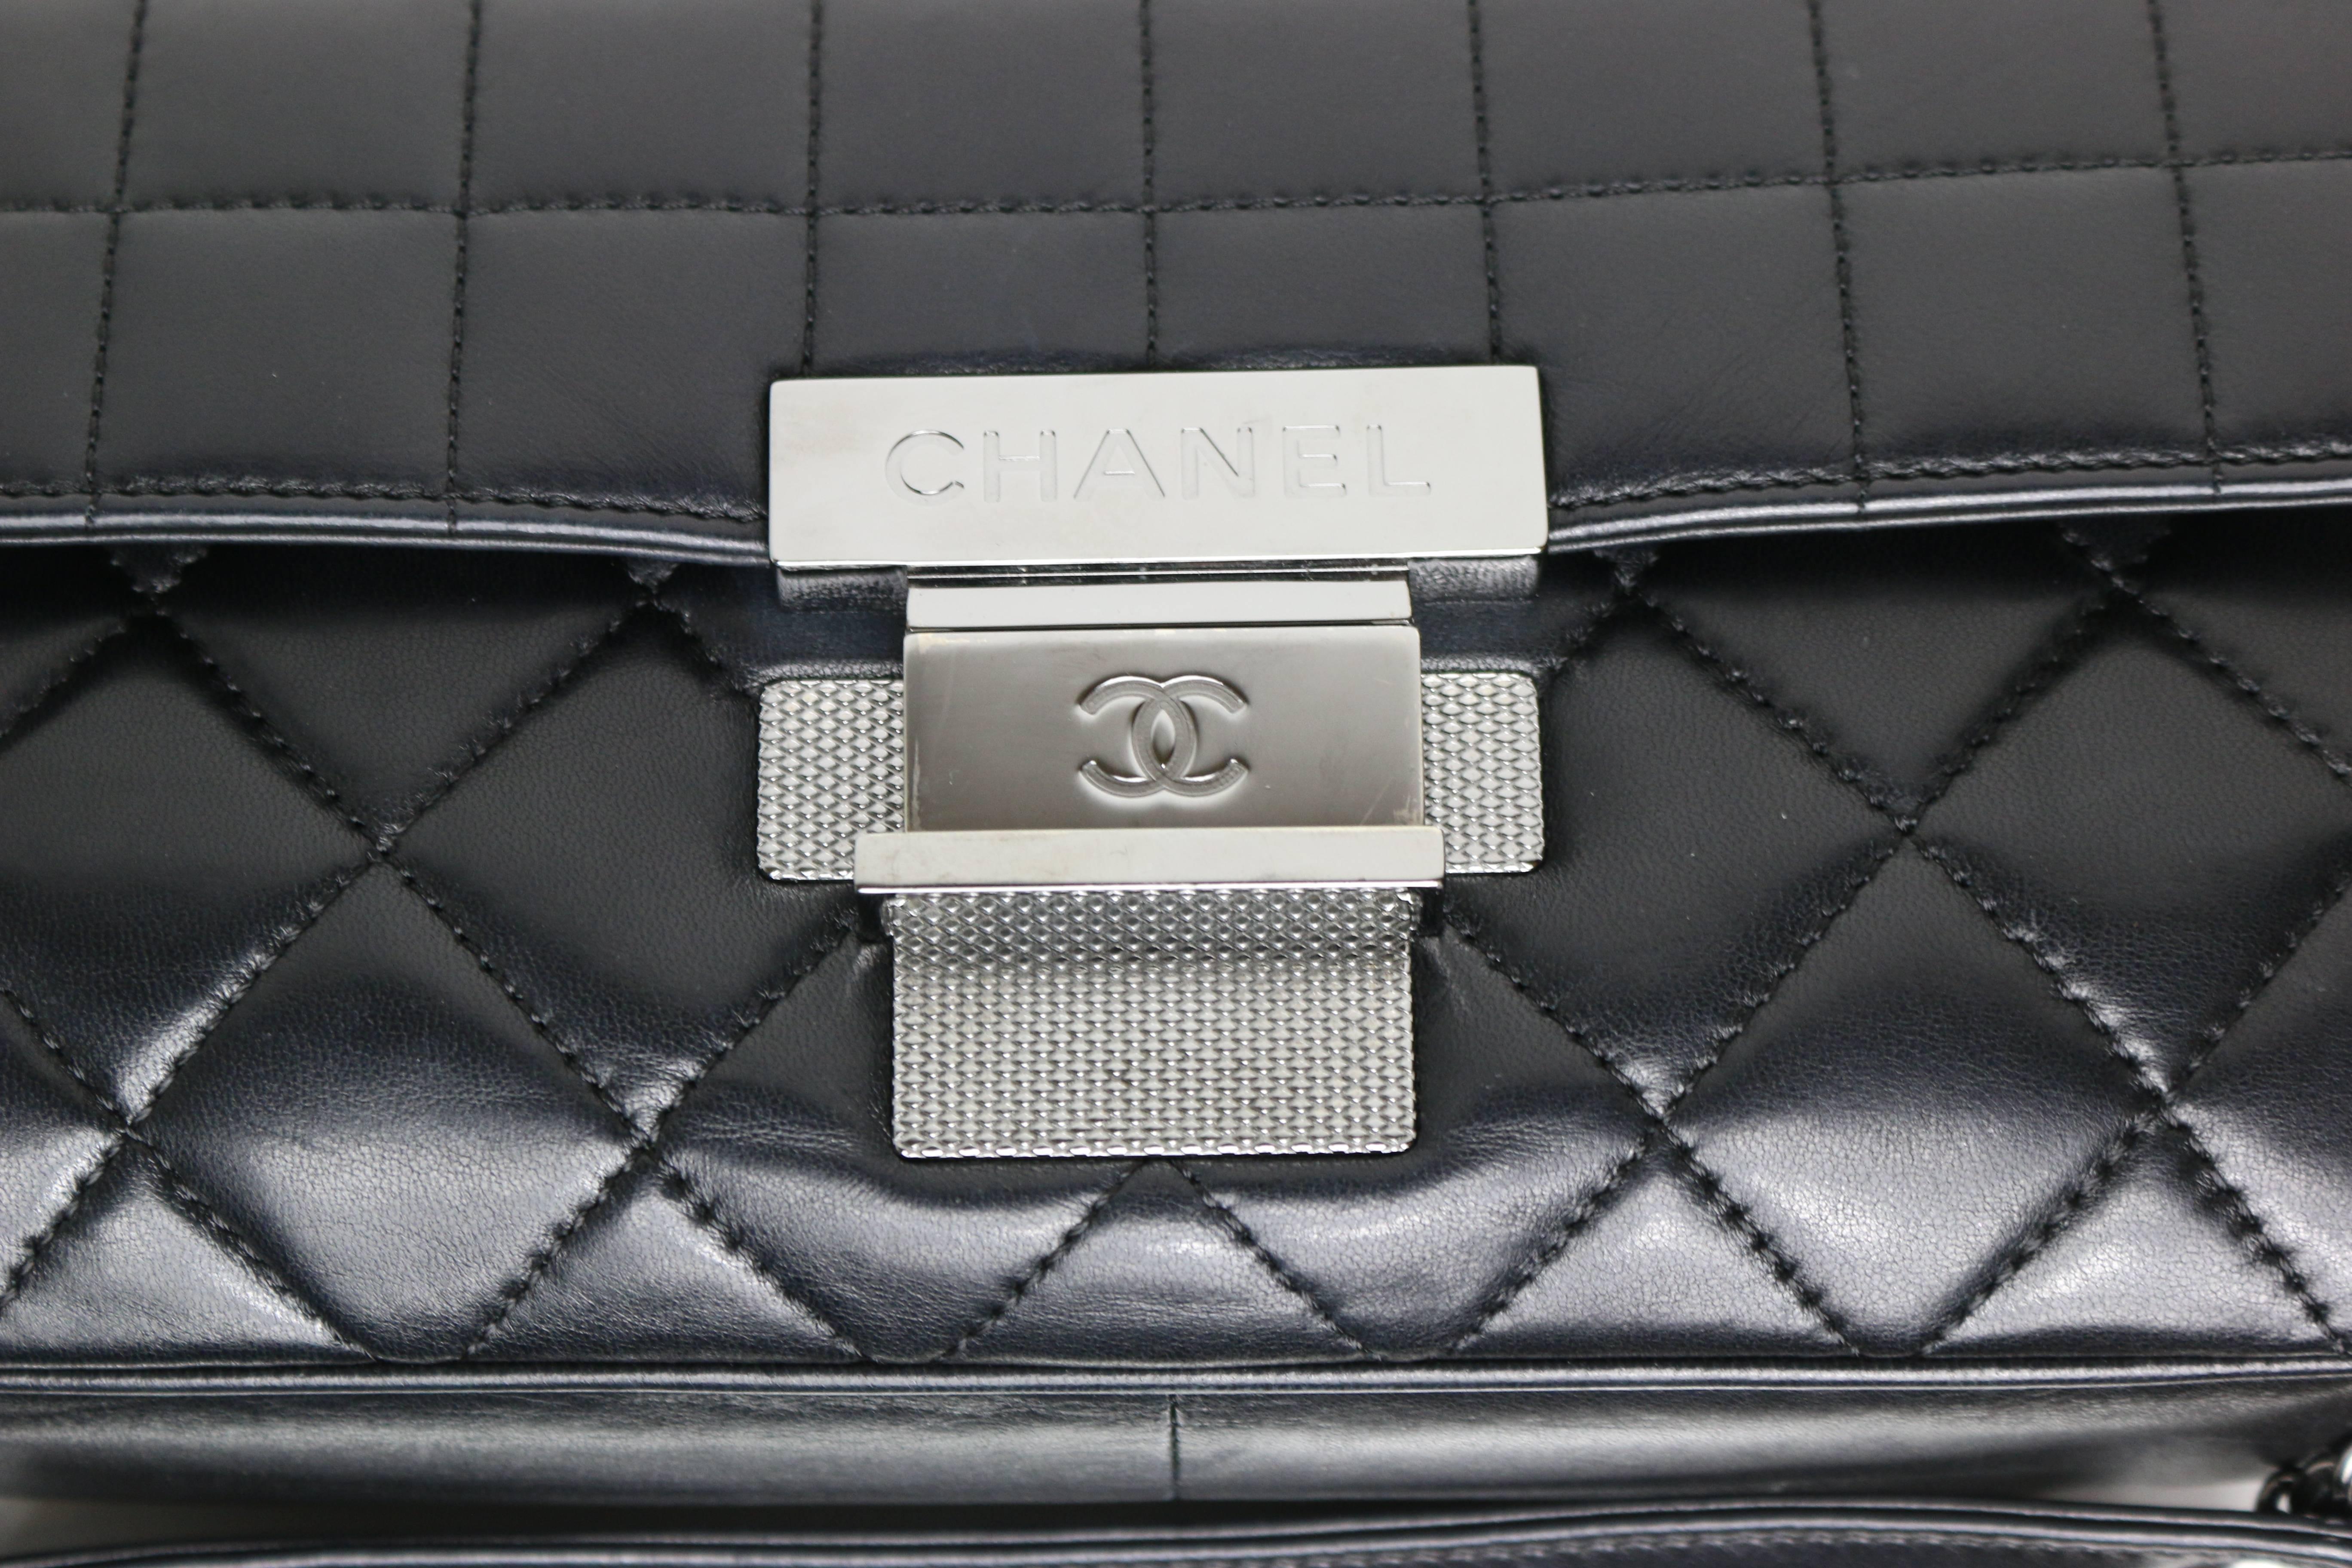 - Chanel black quilted lambskin leather motorcycle style silver chain shoulder bag from 2003-2004 collection. 

- Height: 5in I Length: 11in I Silver Chain: 10in I Width: 2.5in. 

- Comes with authenticity card, original box but no dust bag. 

-